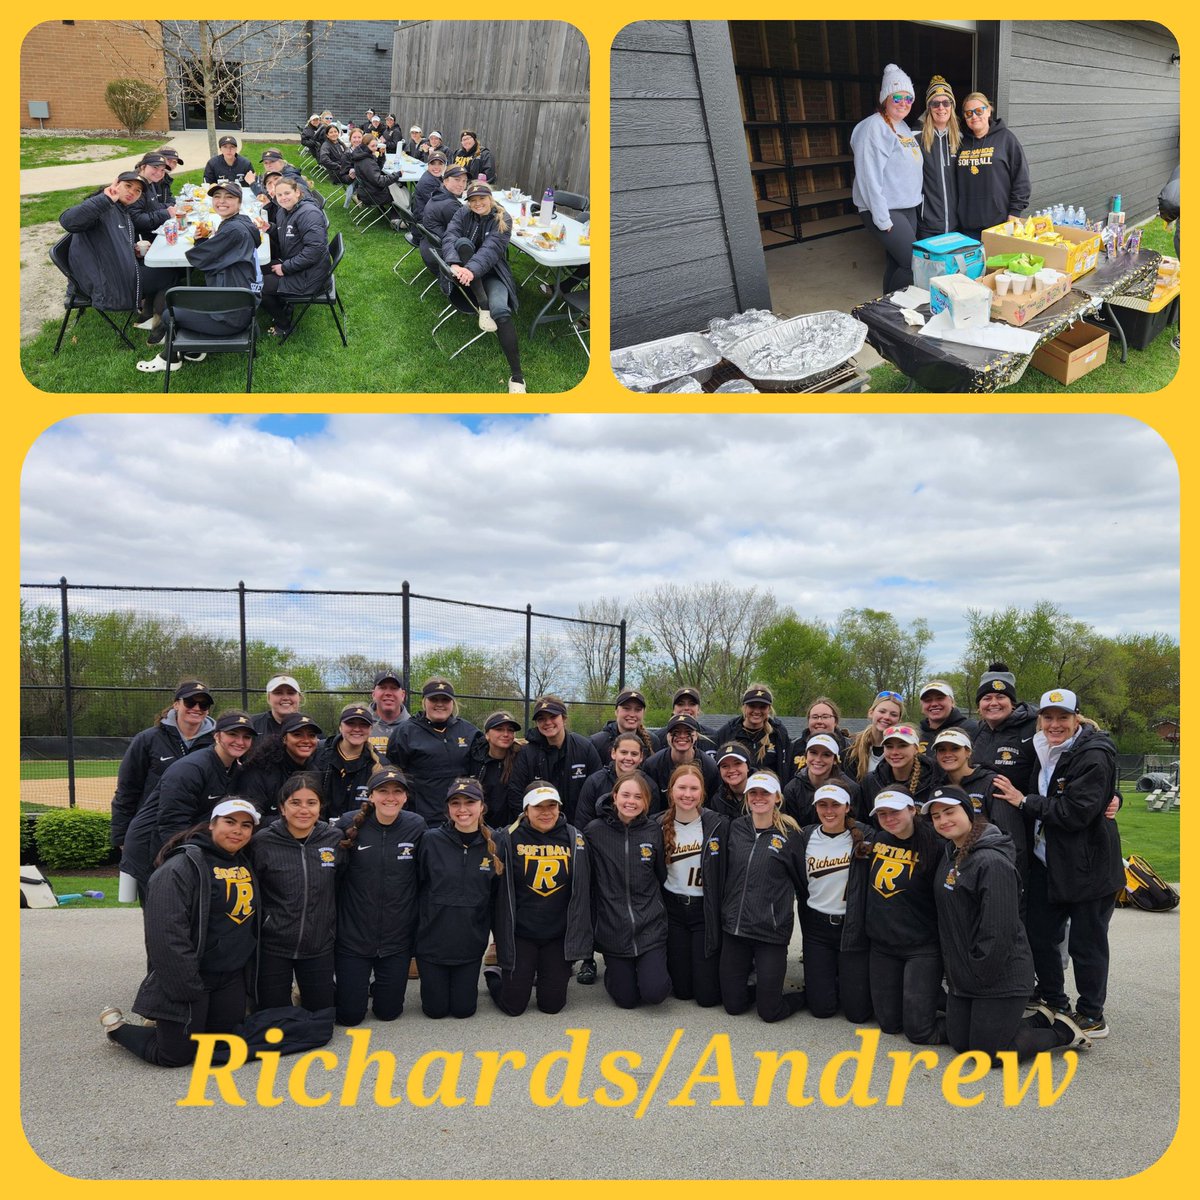 Thank you @AndrewSoftball for your black & gold comradery on NFCA Day! Super game & glad you enjoyed lunch! BIG 👏🥎💛 to Bulldog parents 4 organizing our delish grillin'! Another GREAT day to be a Bulldog! 🐾🥎💛#NFCADay #nonebetter #bestteamcolorsevah @HLRAthletics @TBaranek